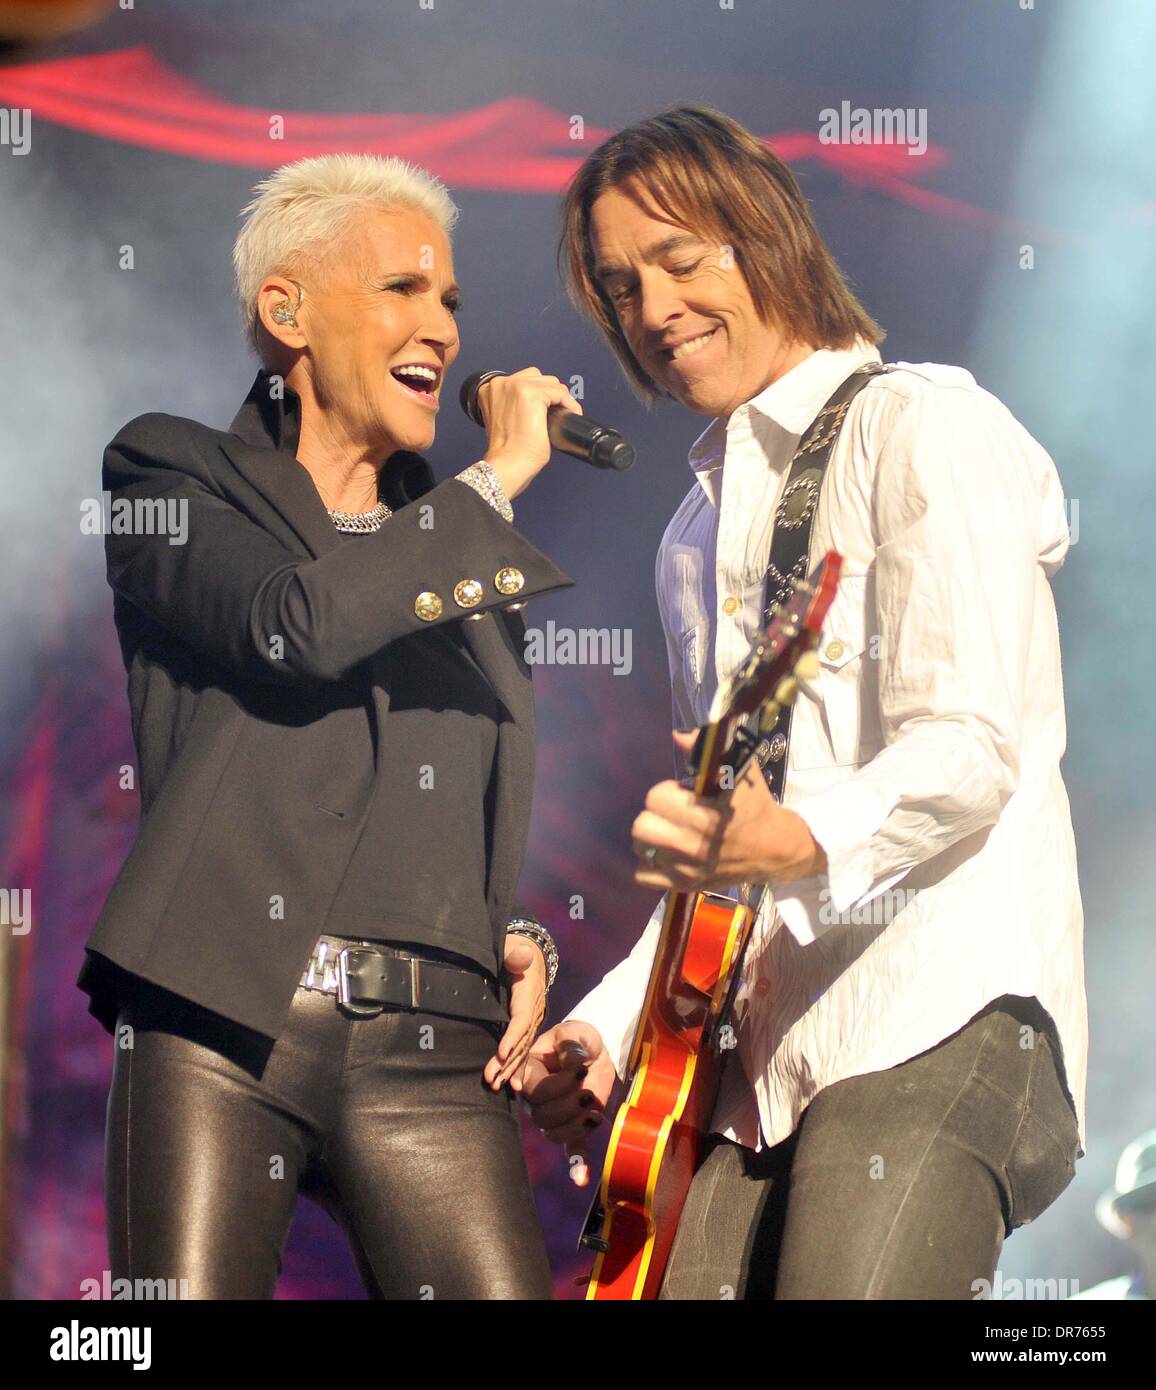 Marie Fredriksson and Per Gessle of Roxette performs live at the 02 Arena  in Dublin Dublin, Ireland - 09.07.12 Stock Photo - Alamy